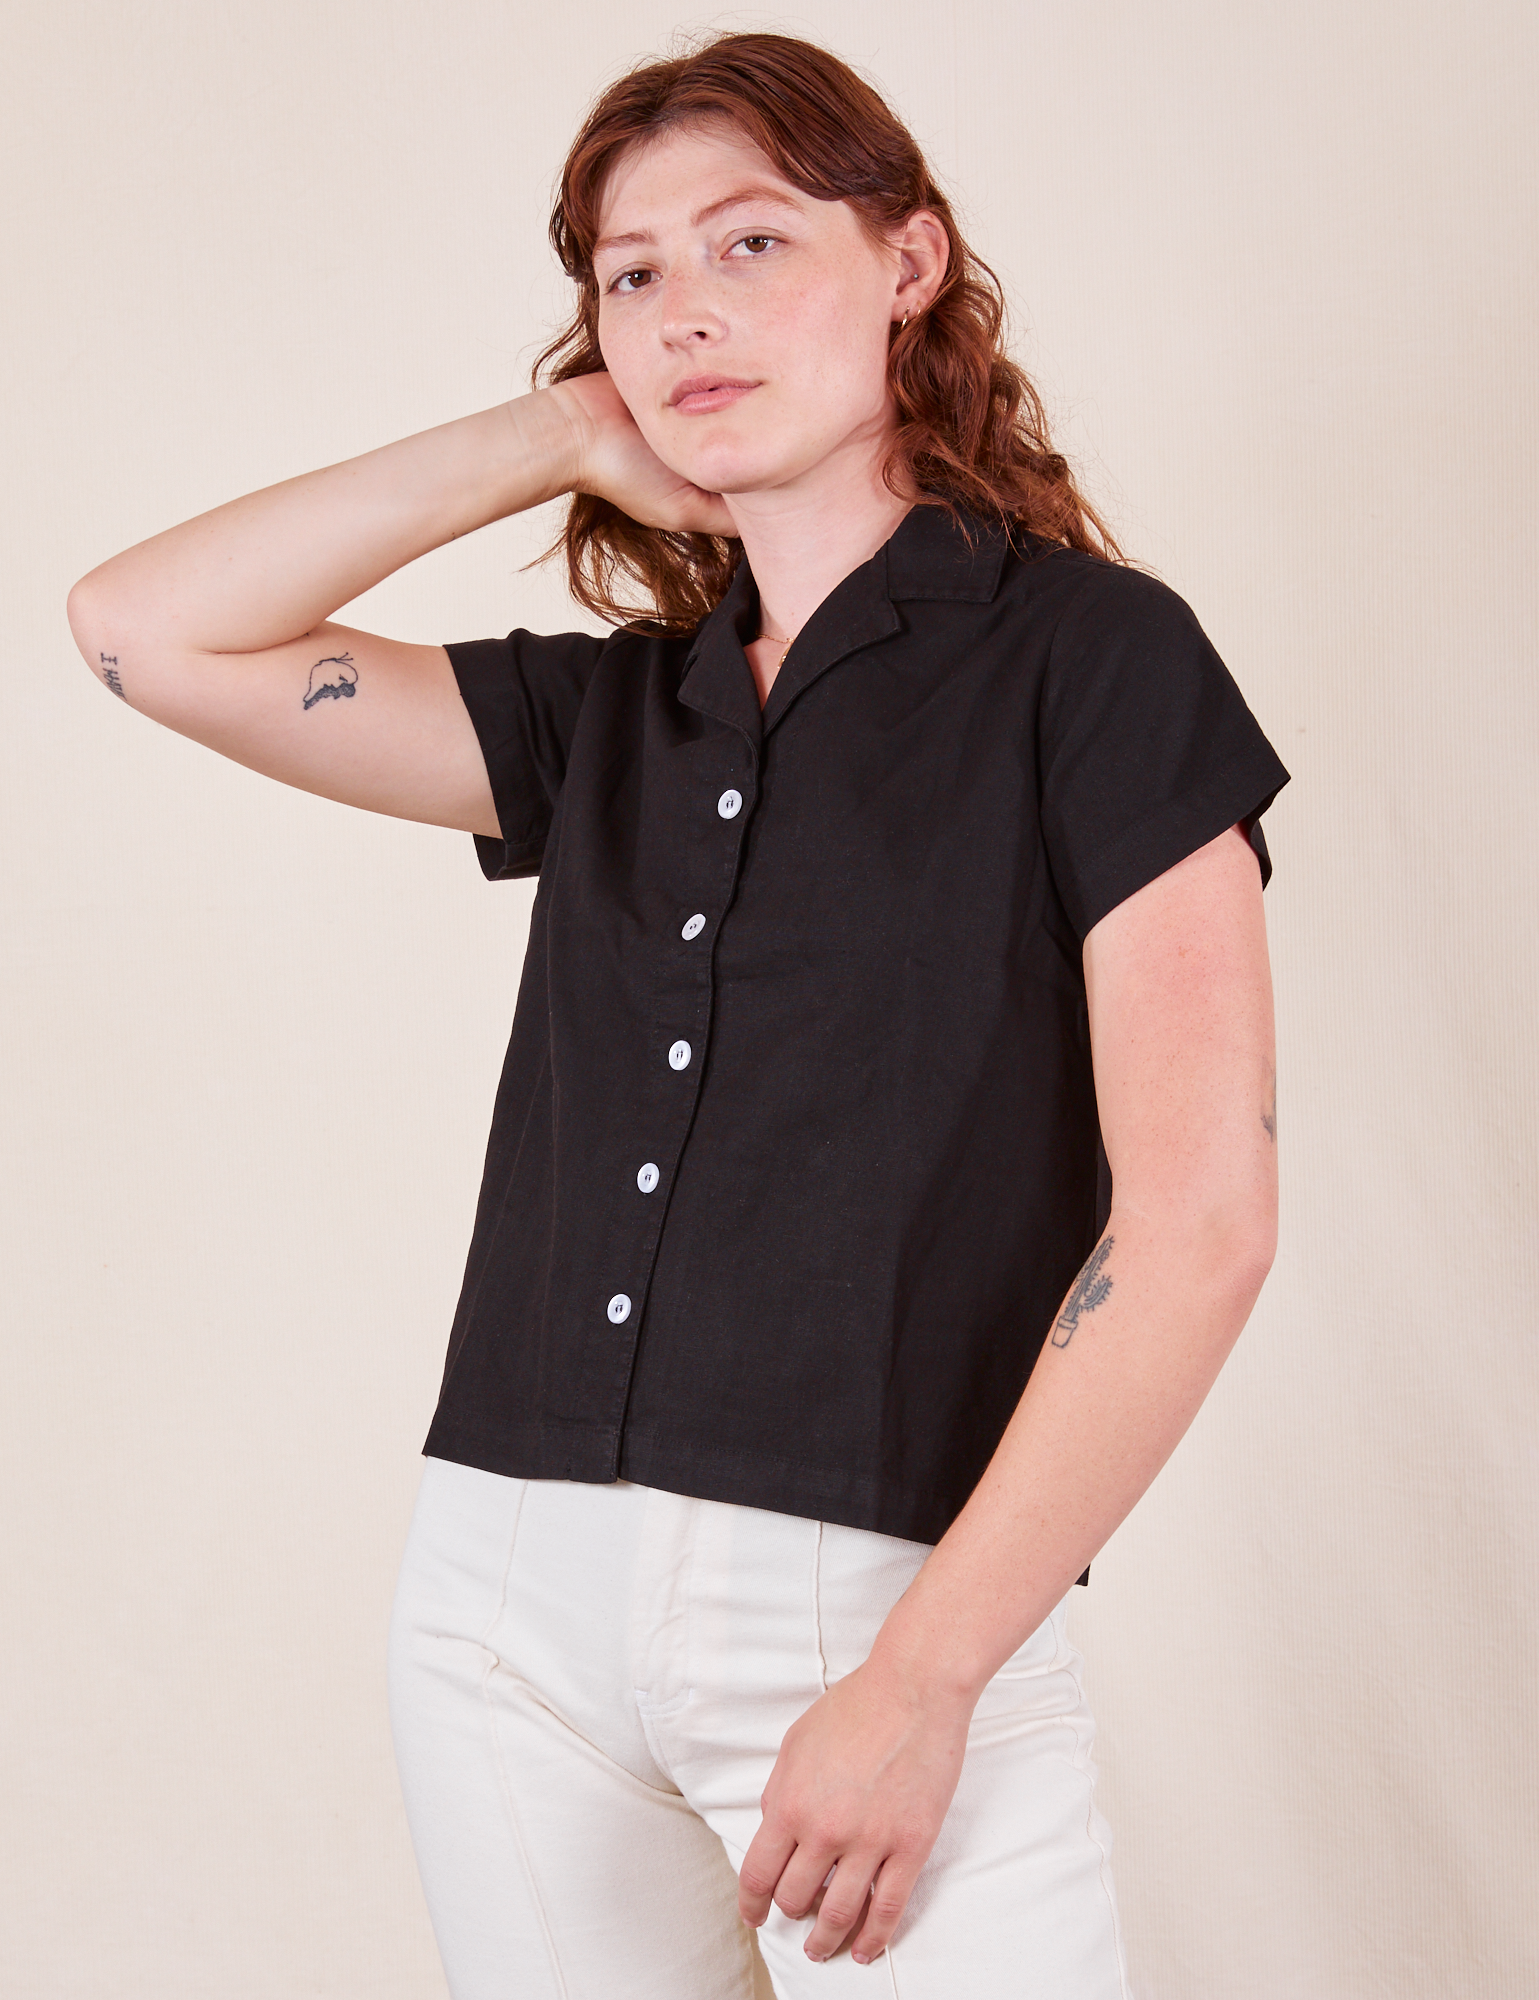 Alex is wearing P Pantry Button-Up in Basic Black